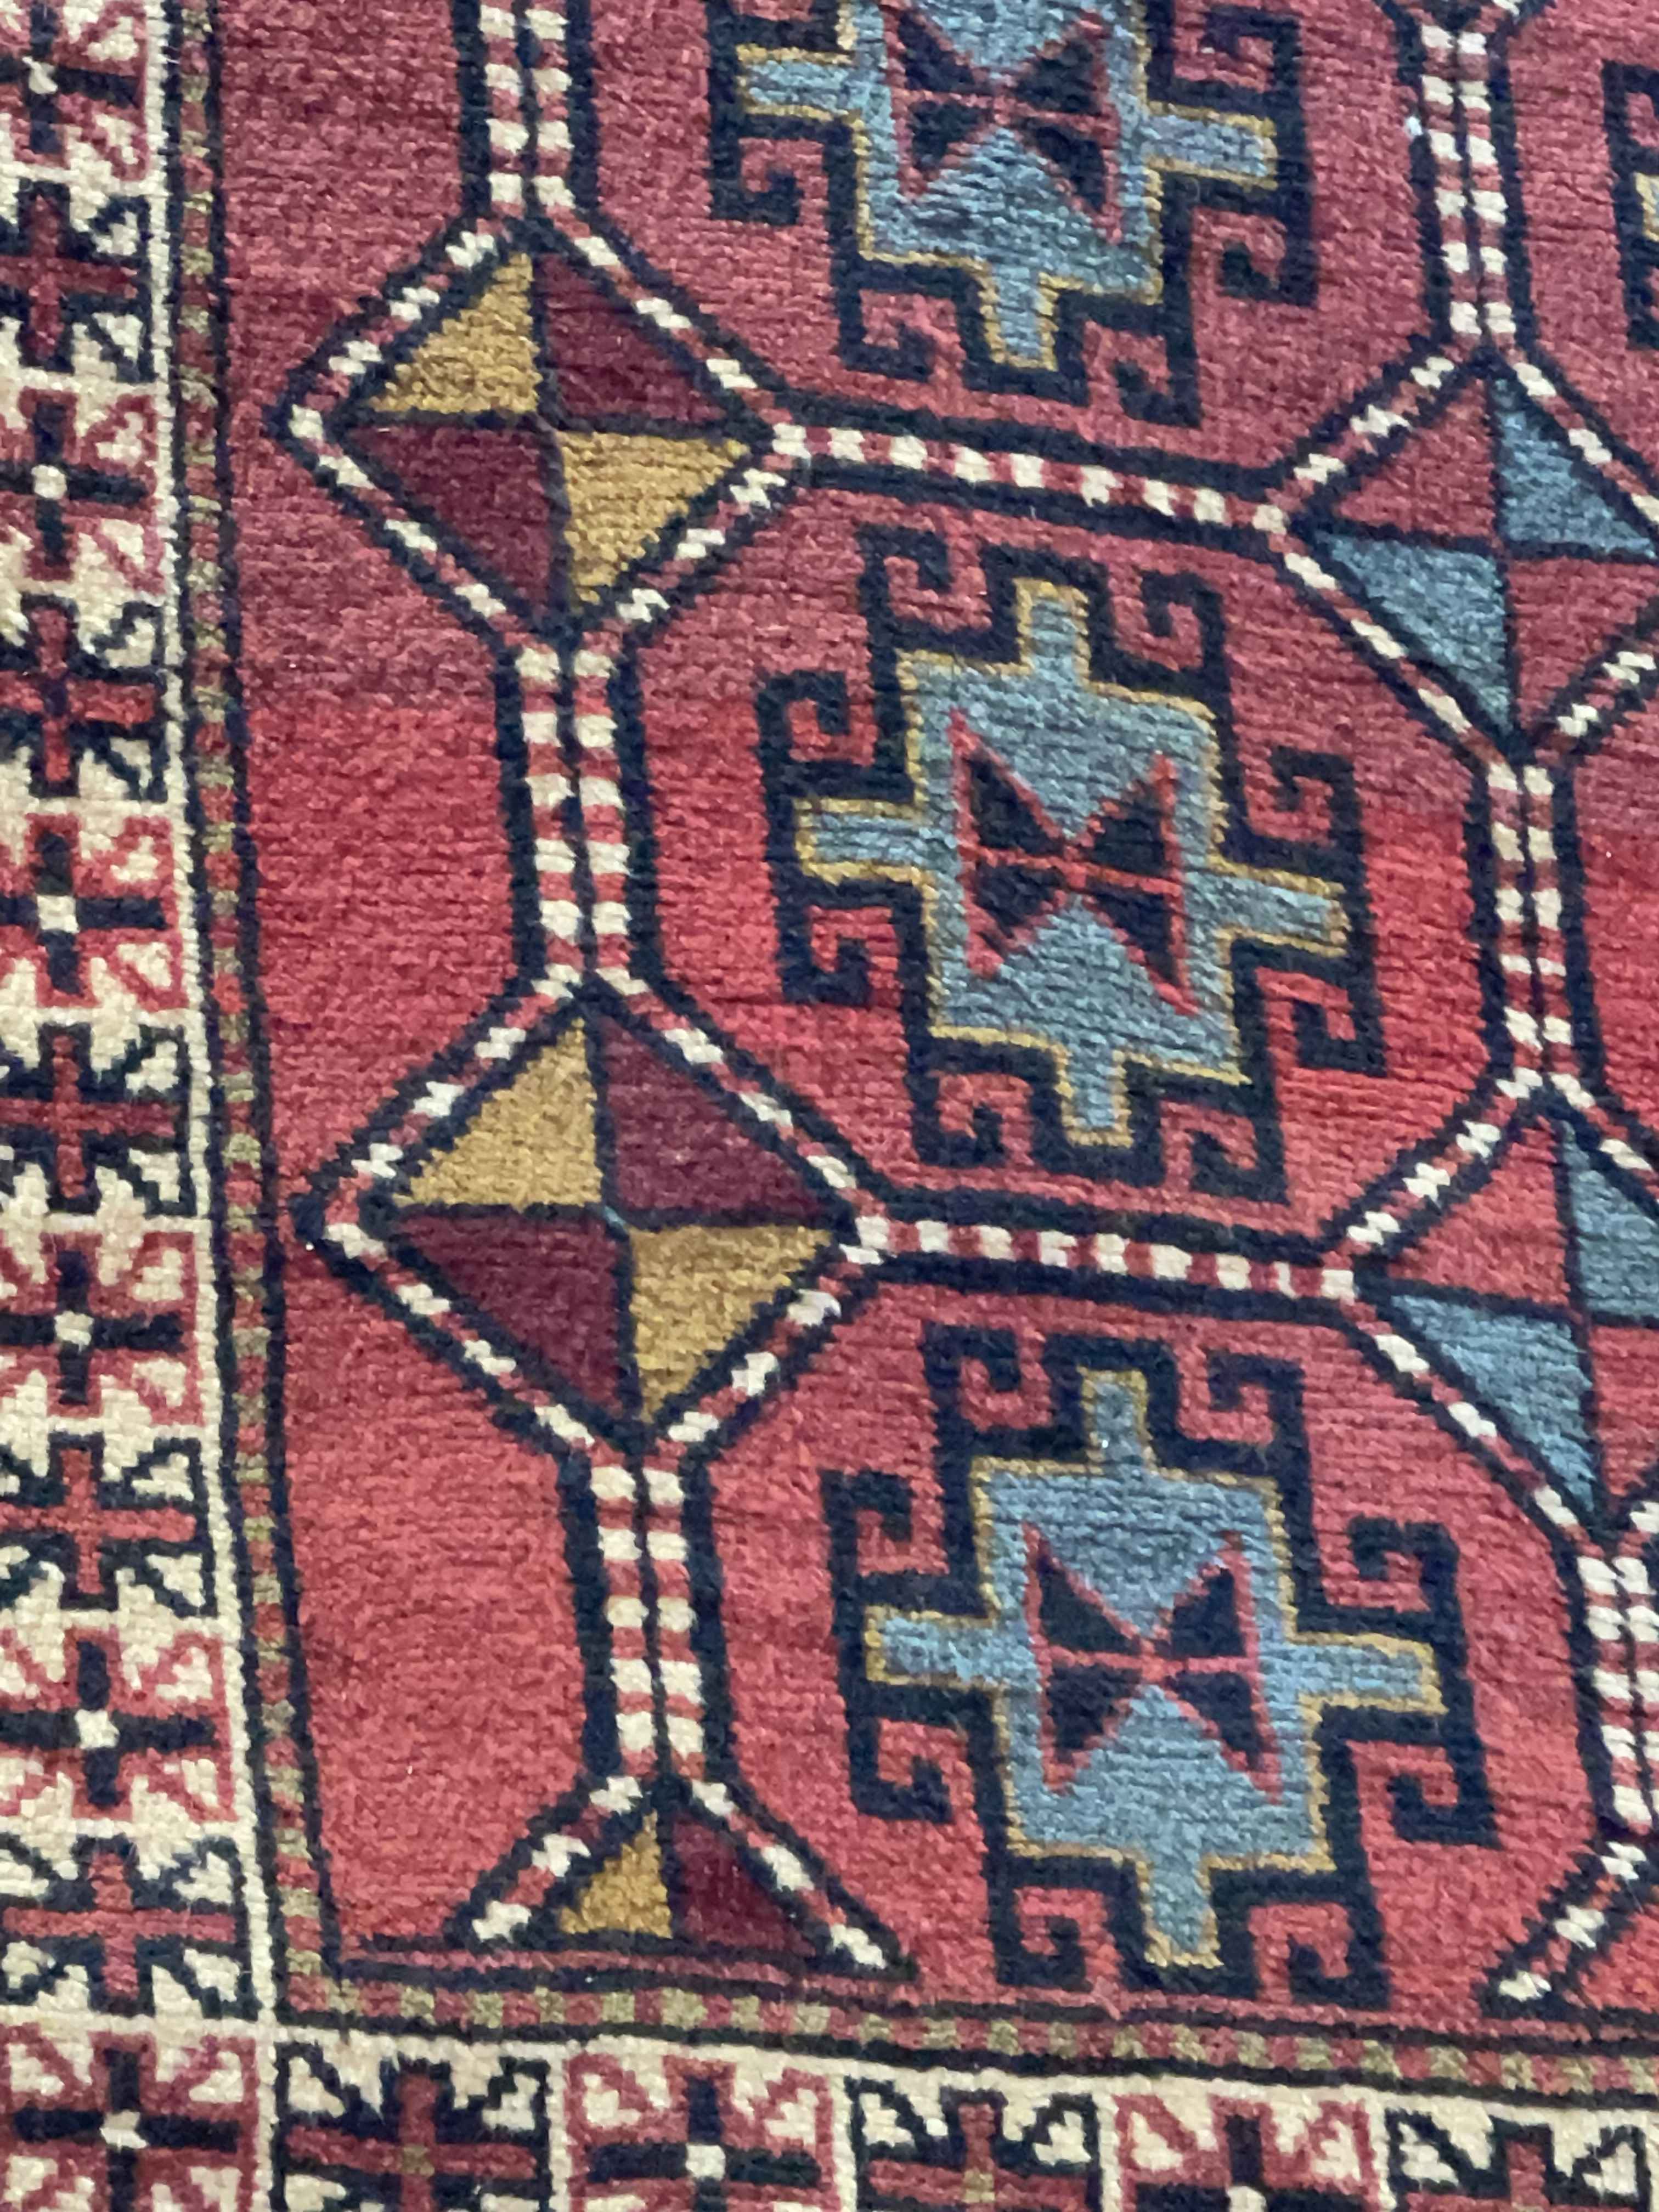 Hand knotted Persian Goochan carpet 1.93 by 1.15. - Image 2 of 2